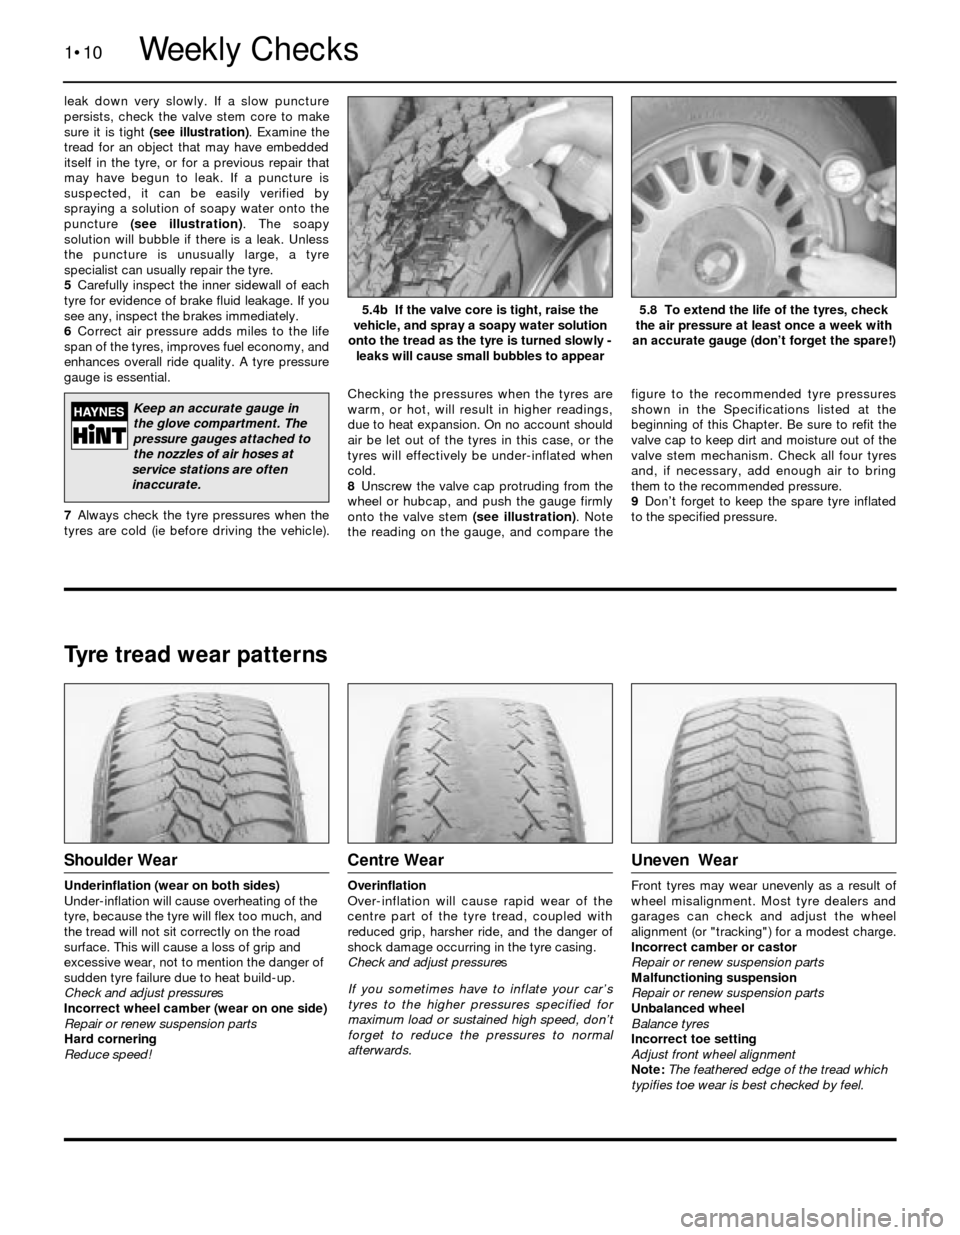 BMW 5 SERIES 1988 E34 Workshop Manual leak down very slowly. If a slow puncture
persists, check the valve stem core to make
sure it is tight (see illustration). Examine the
tread for an object that may have embedded
itself in the tyre, or